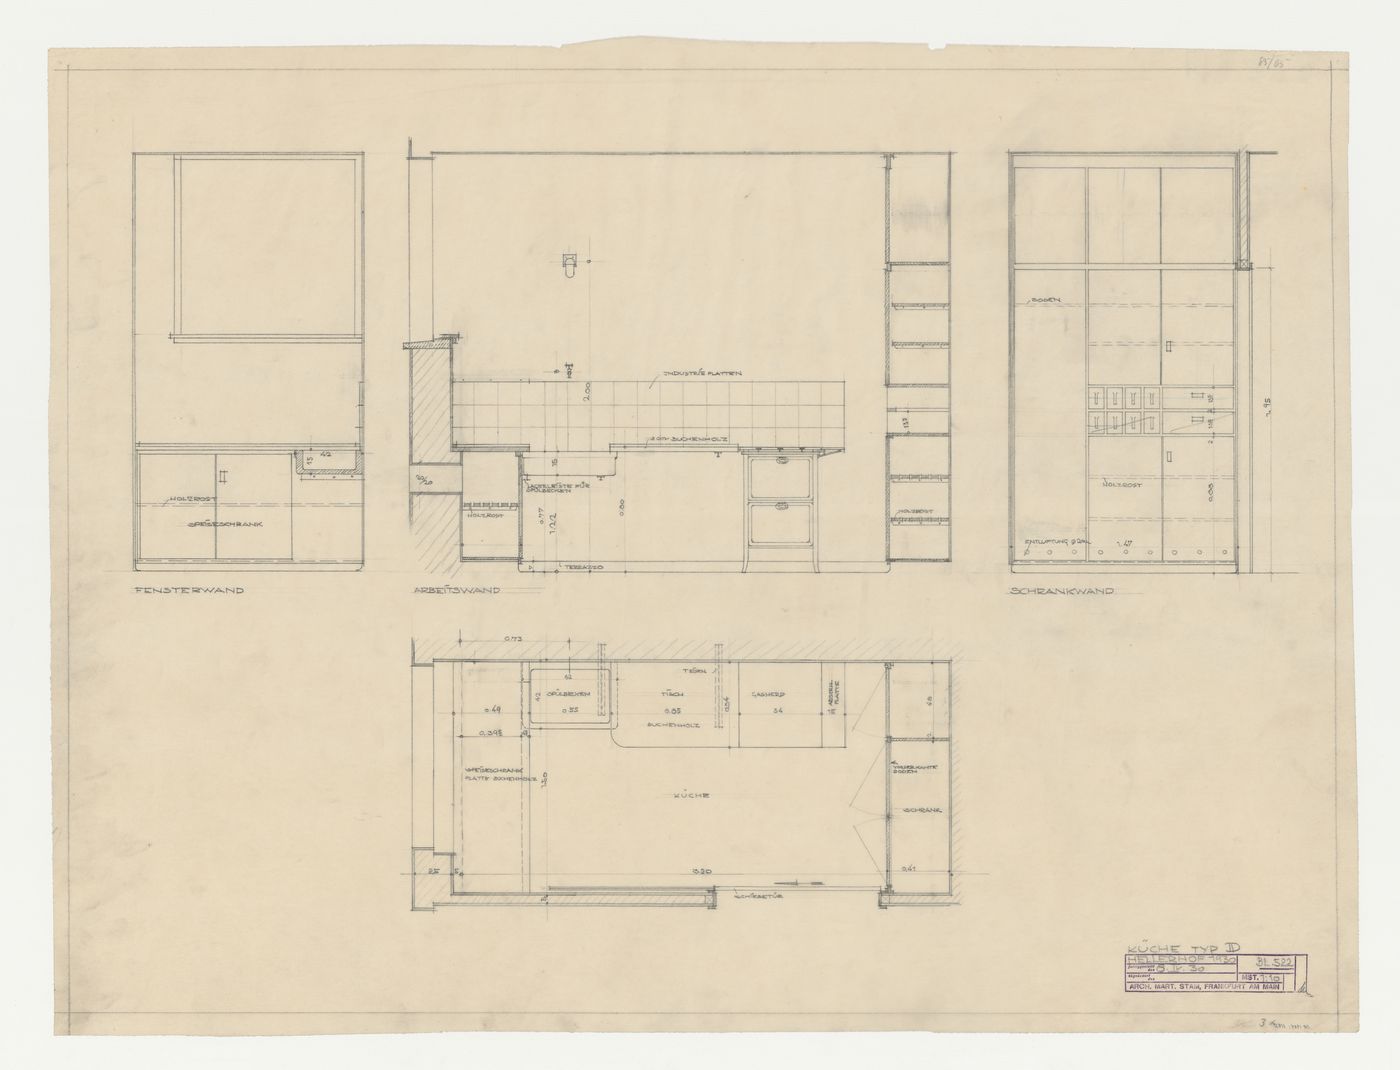 Plan and elevations for a type D kitchen, Hellerhof Housing Estate, Frankfurt am Main, Germany